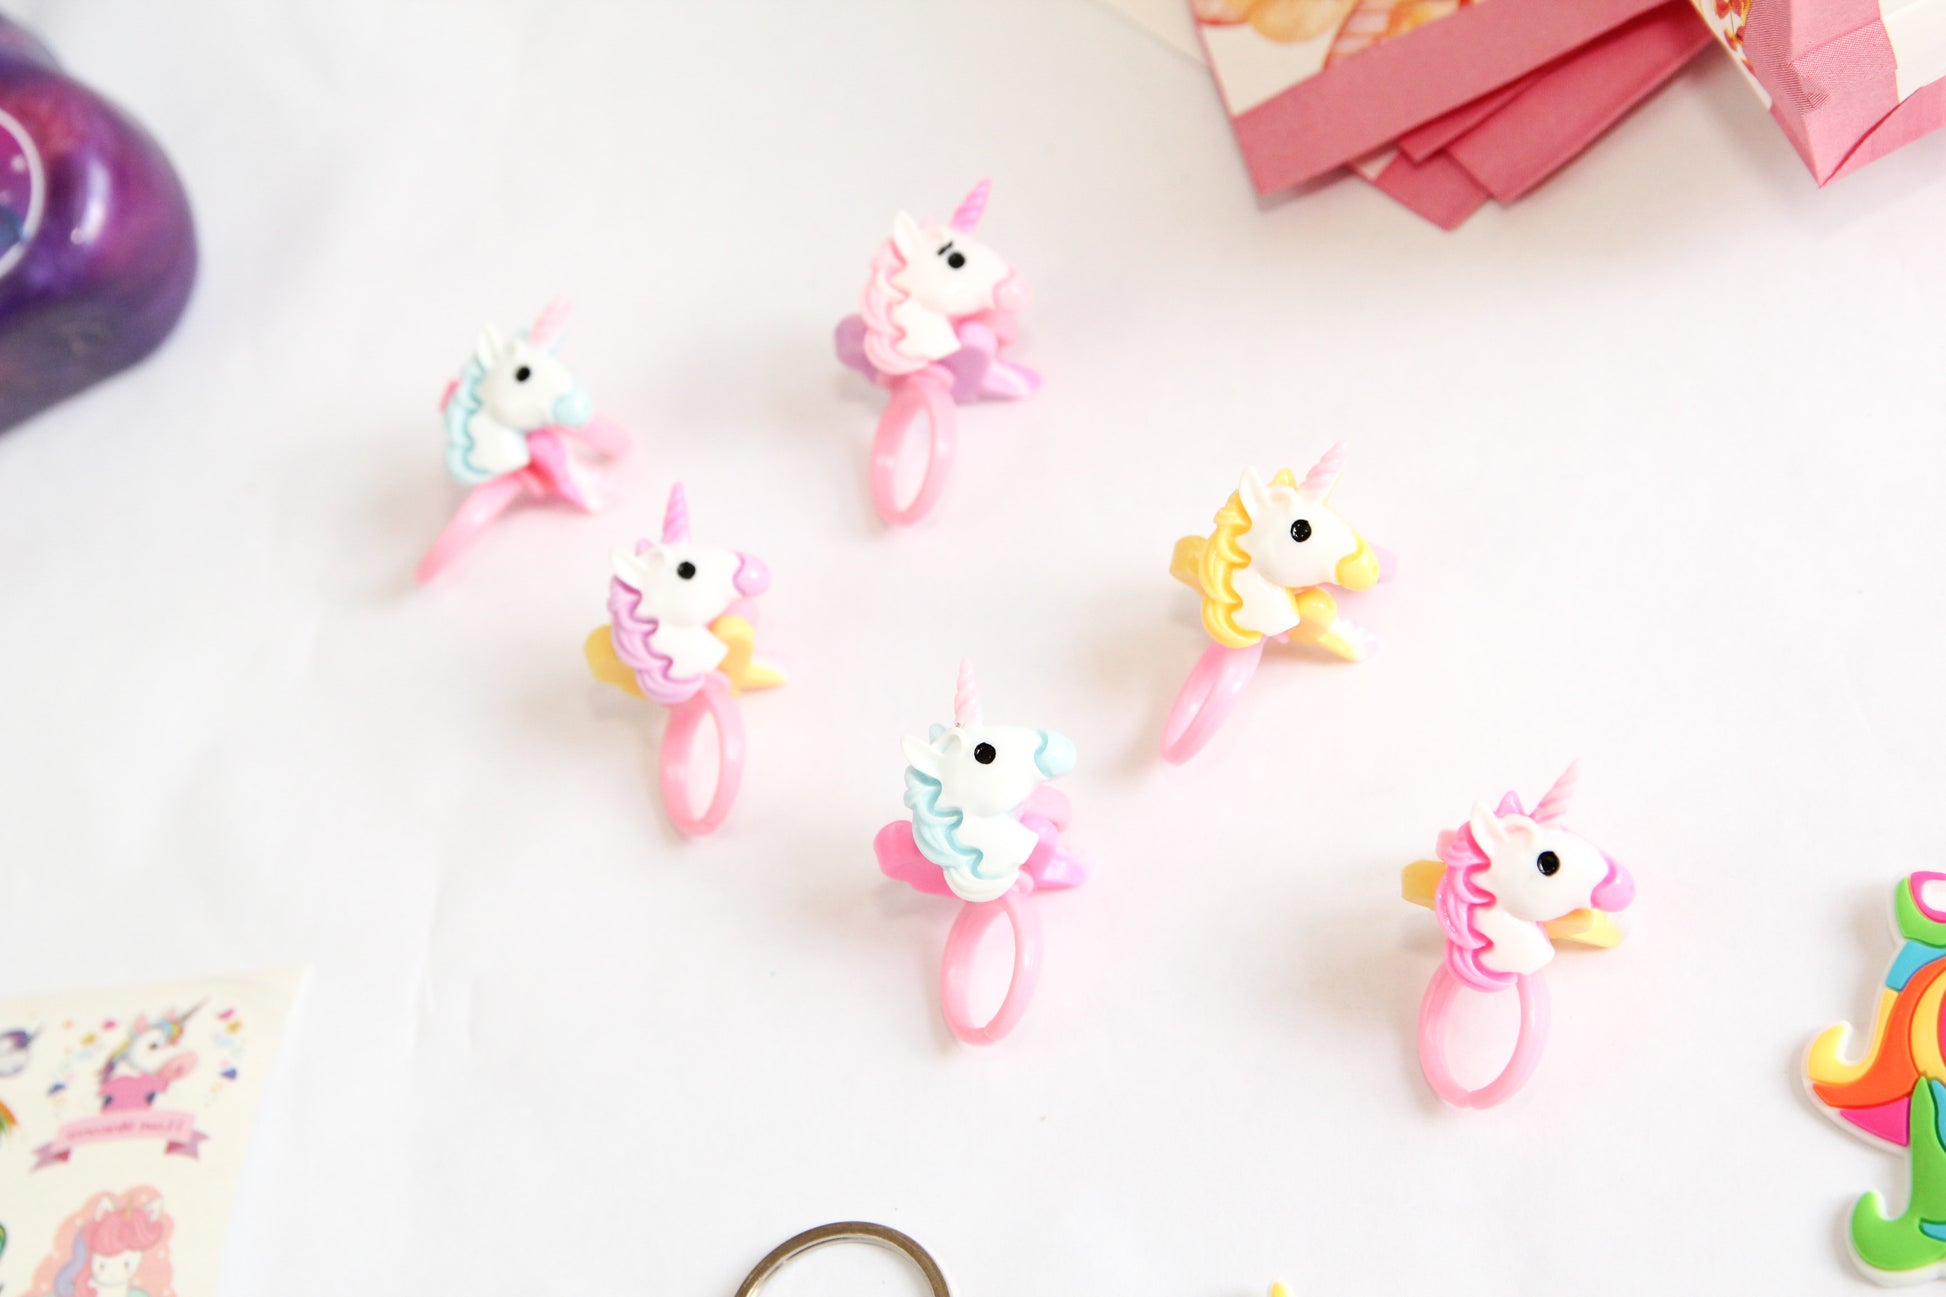 Moltby 134Pcs Unicorn Party Favors Birthday Supplies for Girls - Include  Unicorn Goodie Bags, Luminous Tattoos, Slime Kit Rainbow Unicorn Pinatas  for